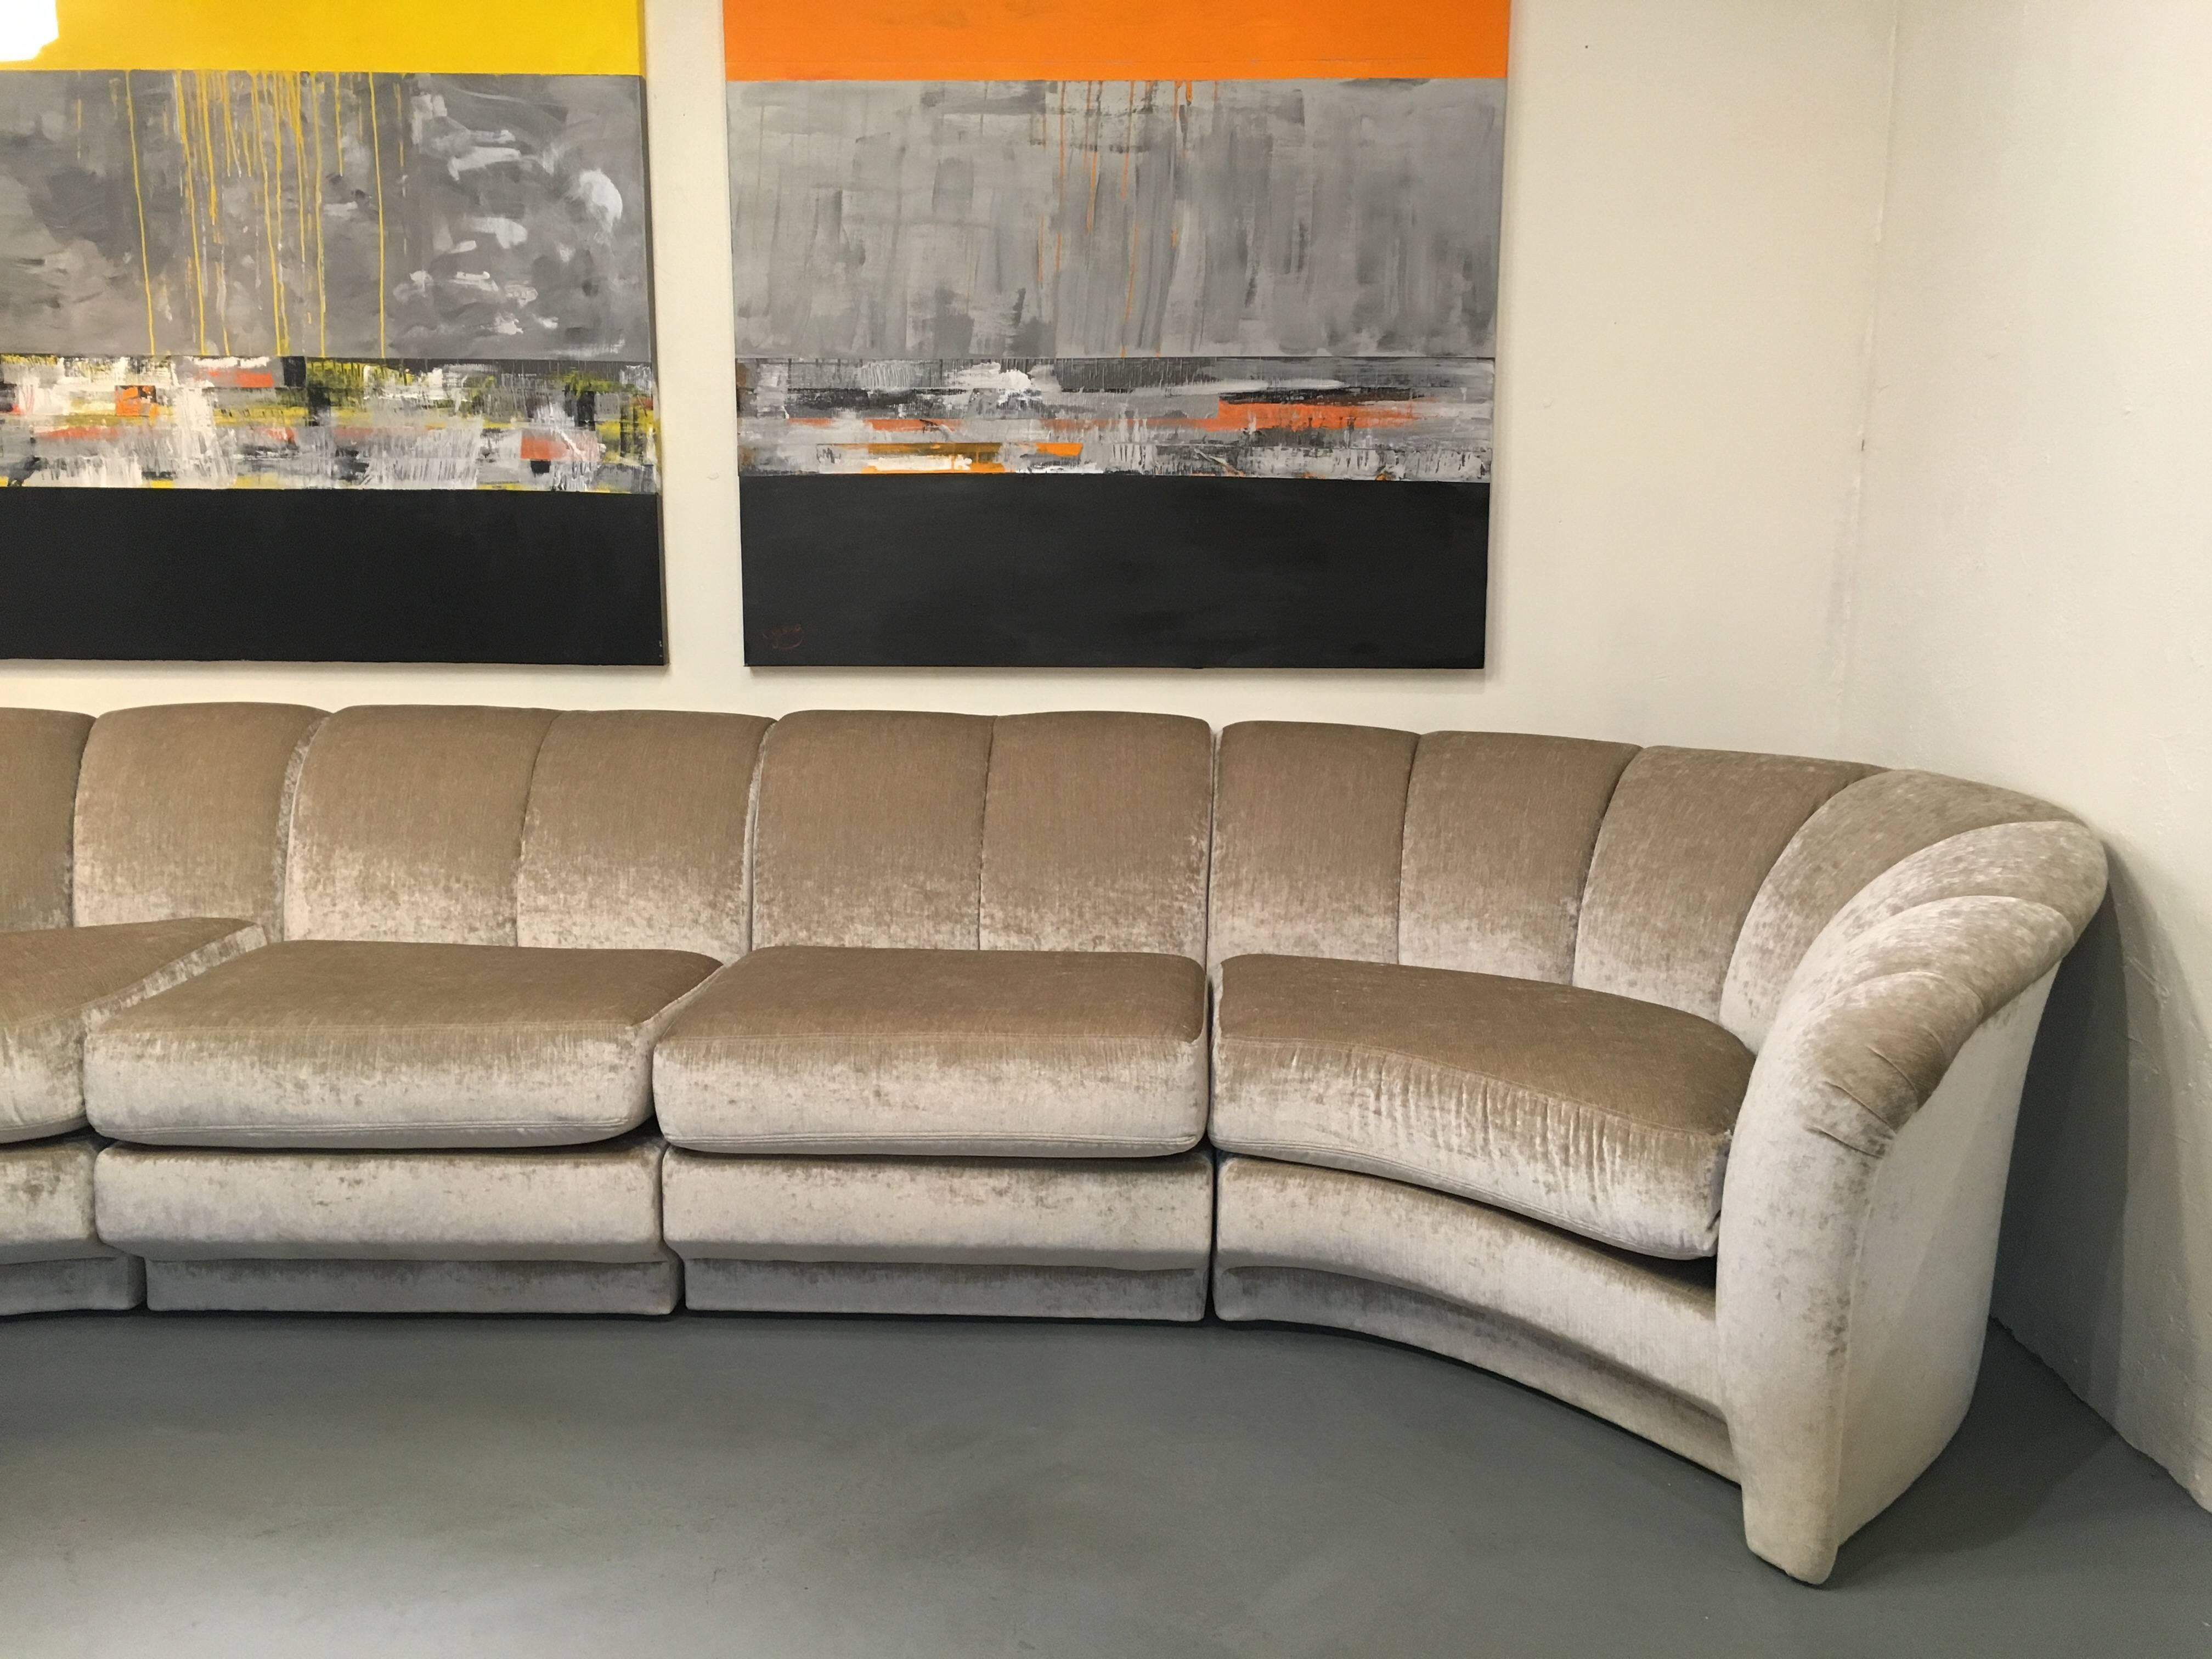 American Five-Piece Sectional Sofa by Milo Baughman for Thayer Coggin